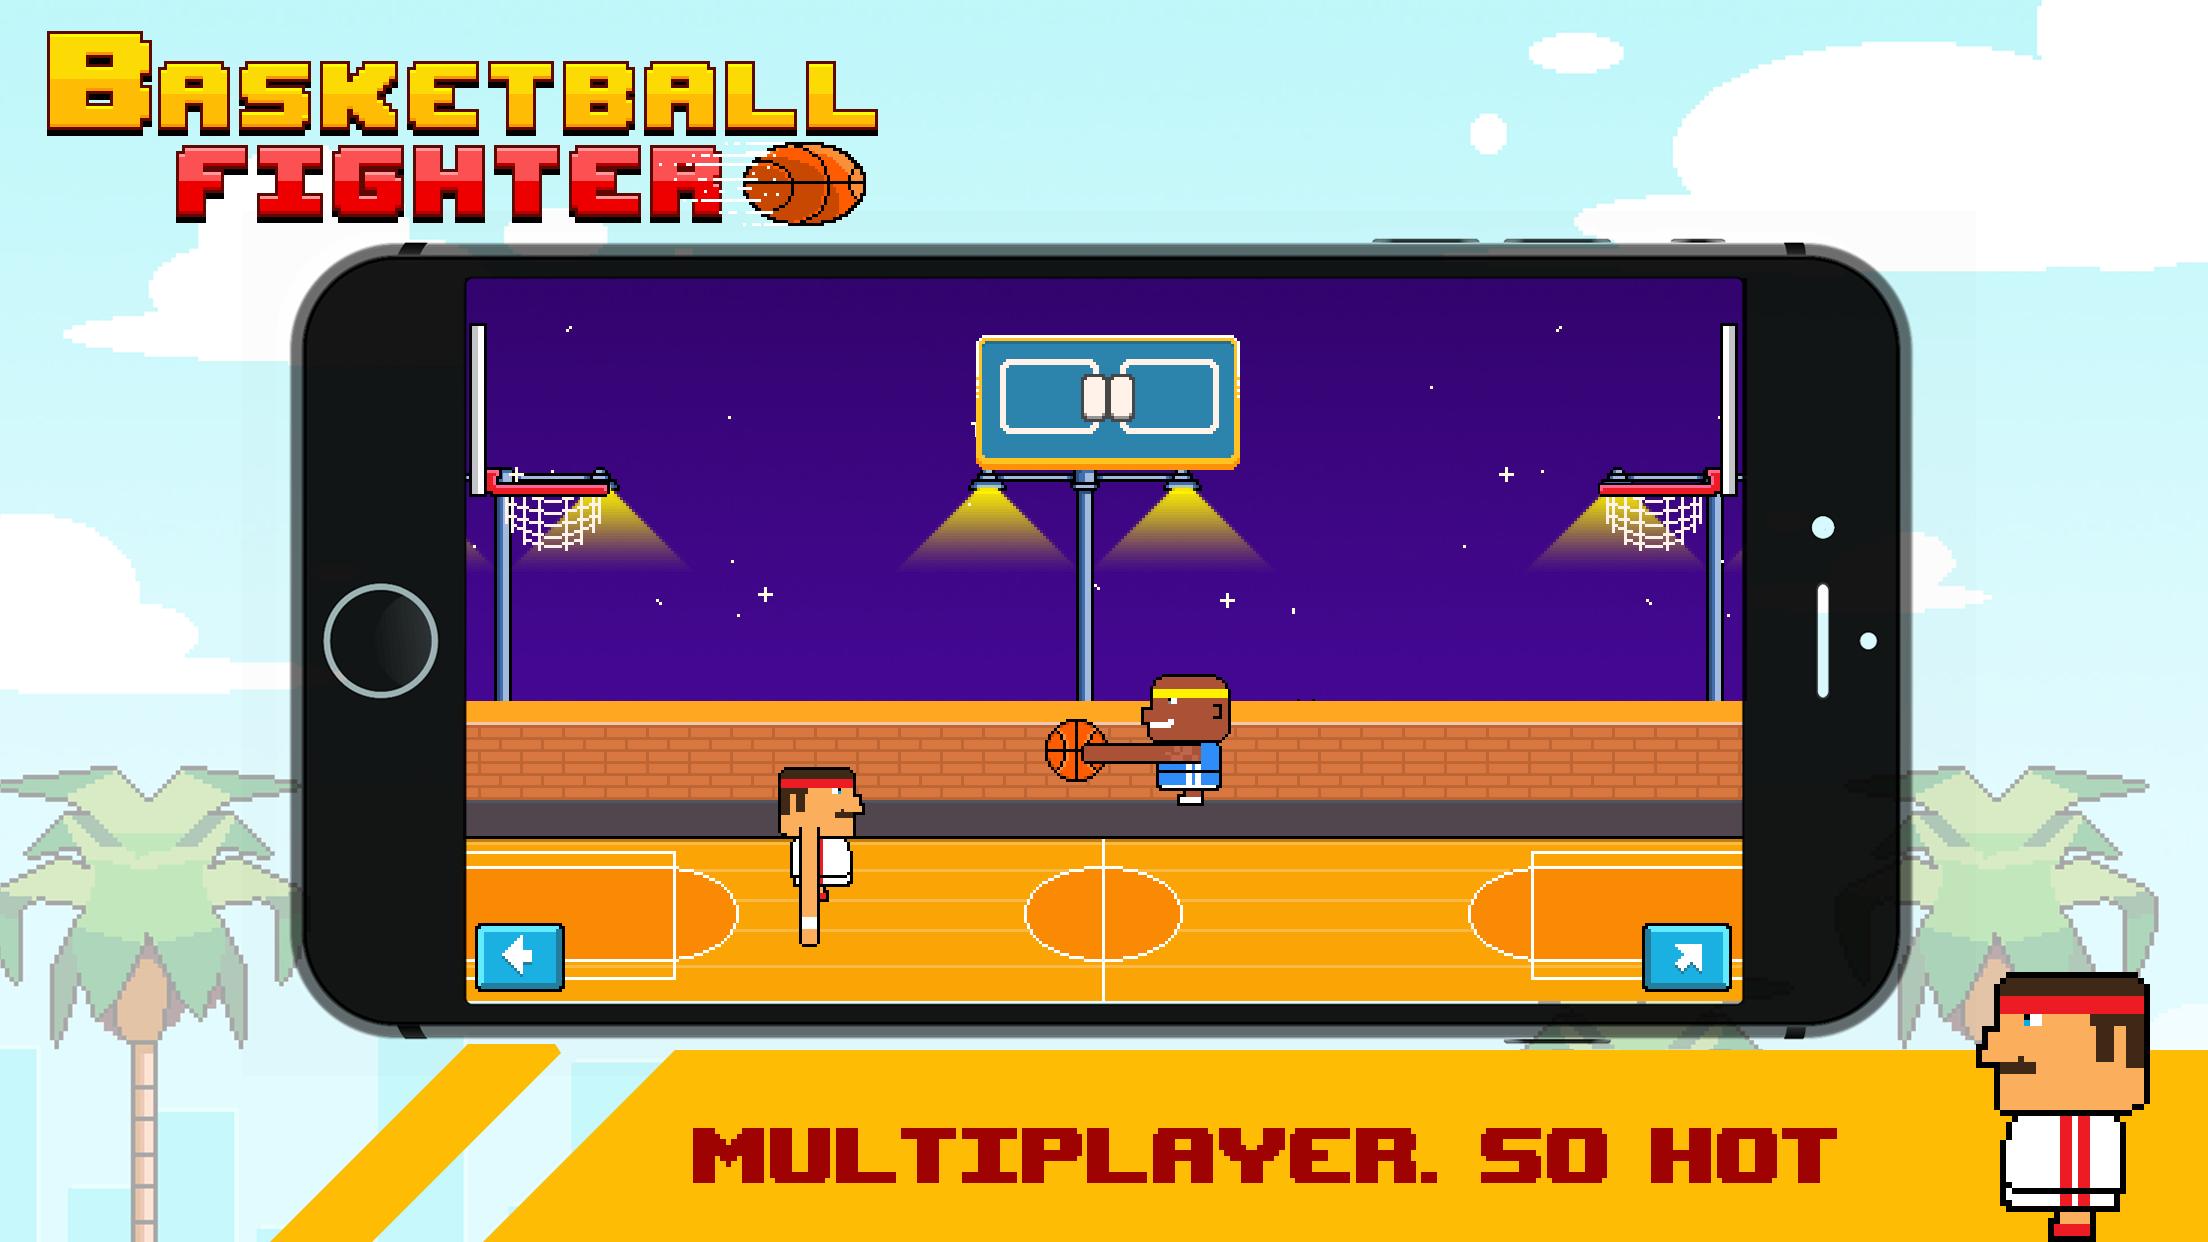 Can you play this game. Player геймс. Y8 games 2 Player. Basketball game 2 Player. Баскетболист 2d.